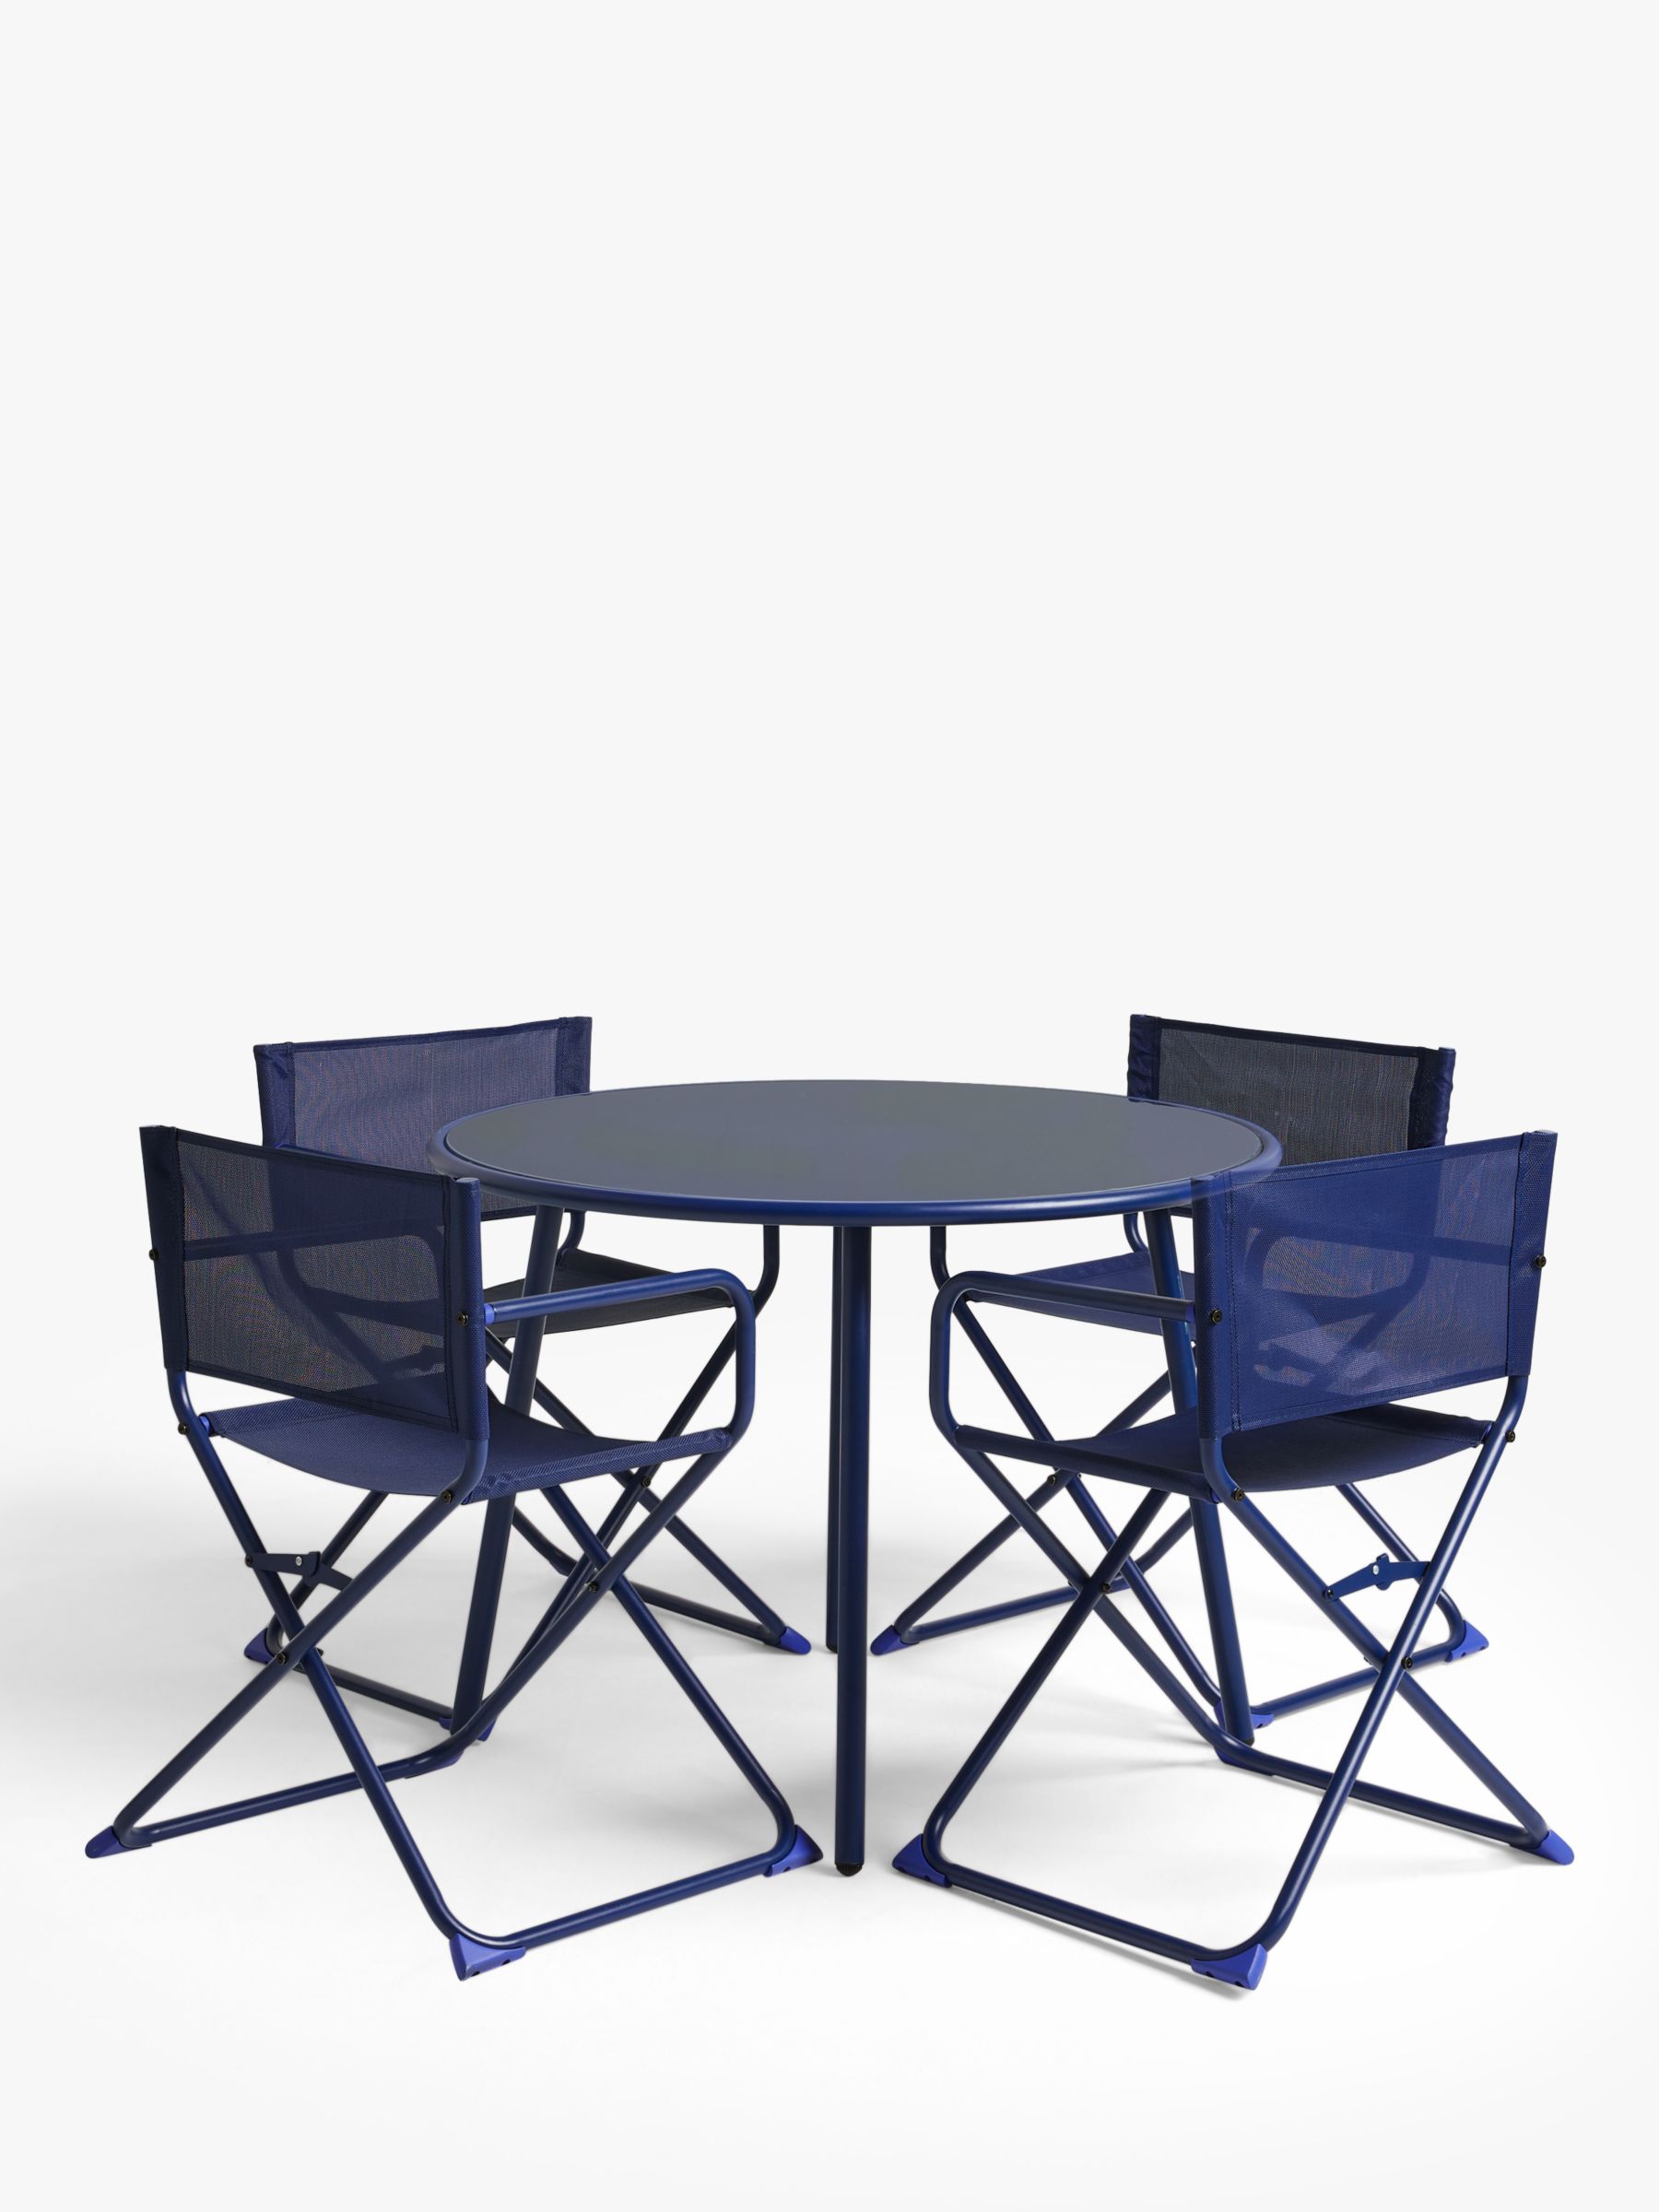 Photo of John lewis anyday brights 4-seater metal round garden dining table & chairs set estate blue